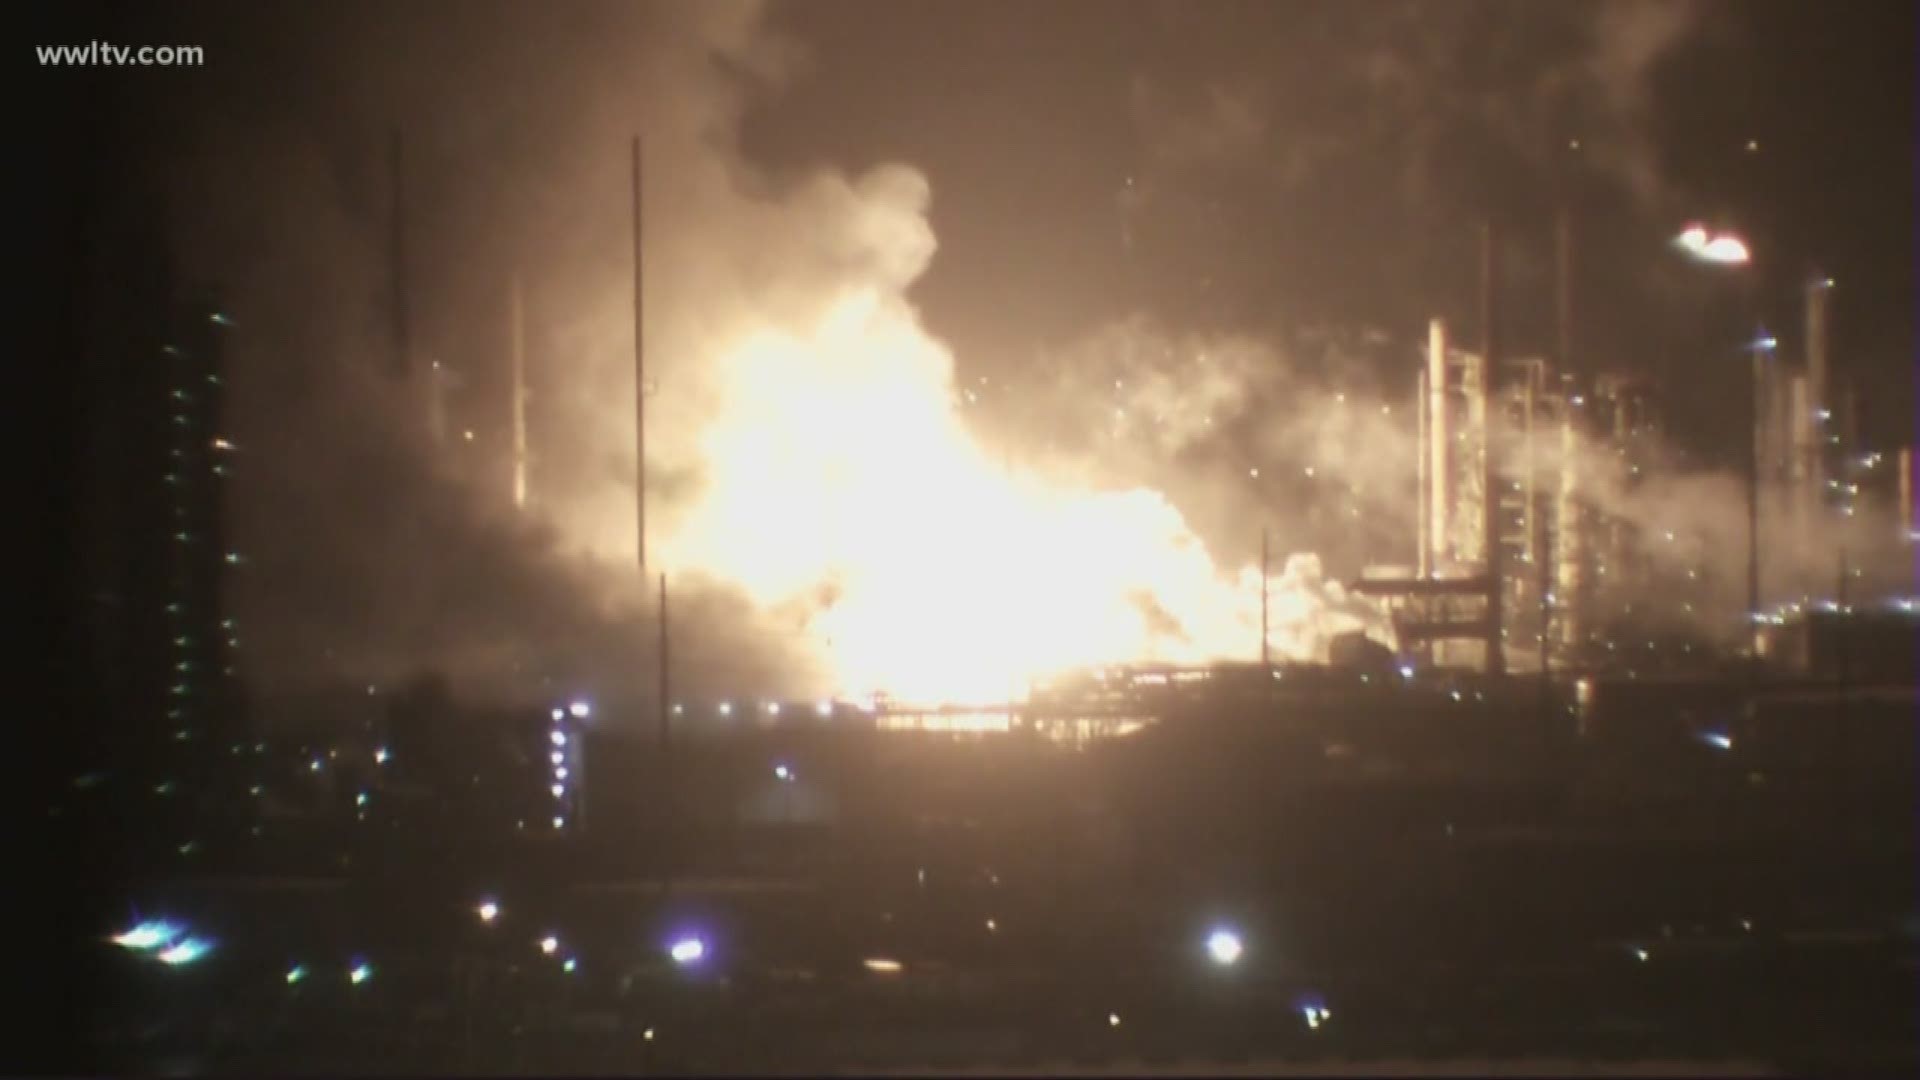 Fire crews battled the fire for hours as officials searched for the cause and monitored air quality around the plant.